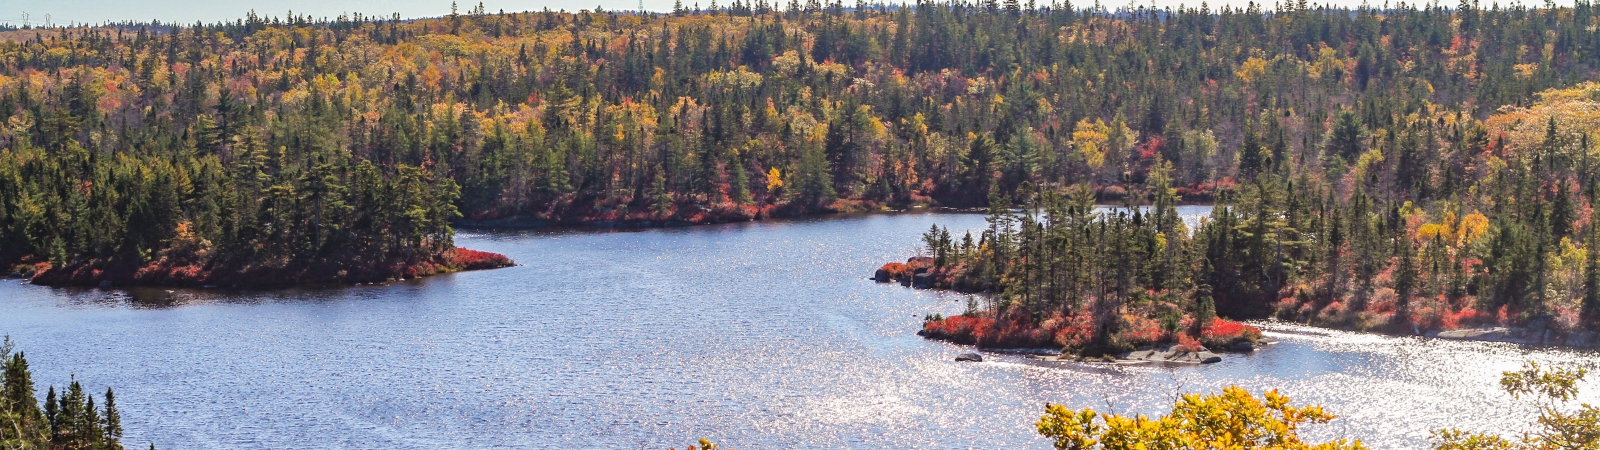 aerial view of a lake surrounded by trees in the Blue Mountain Birch Cove Lakes area